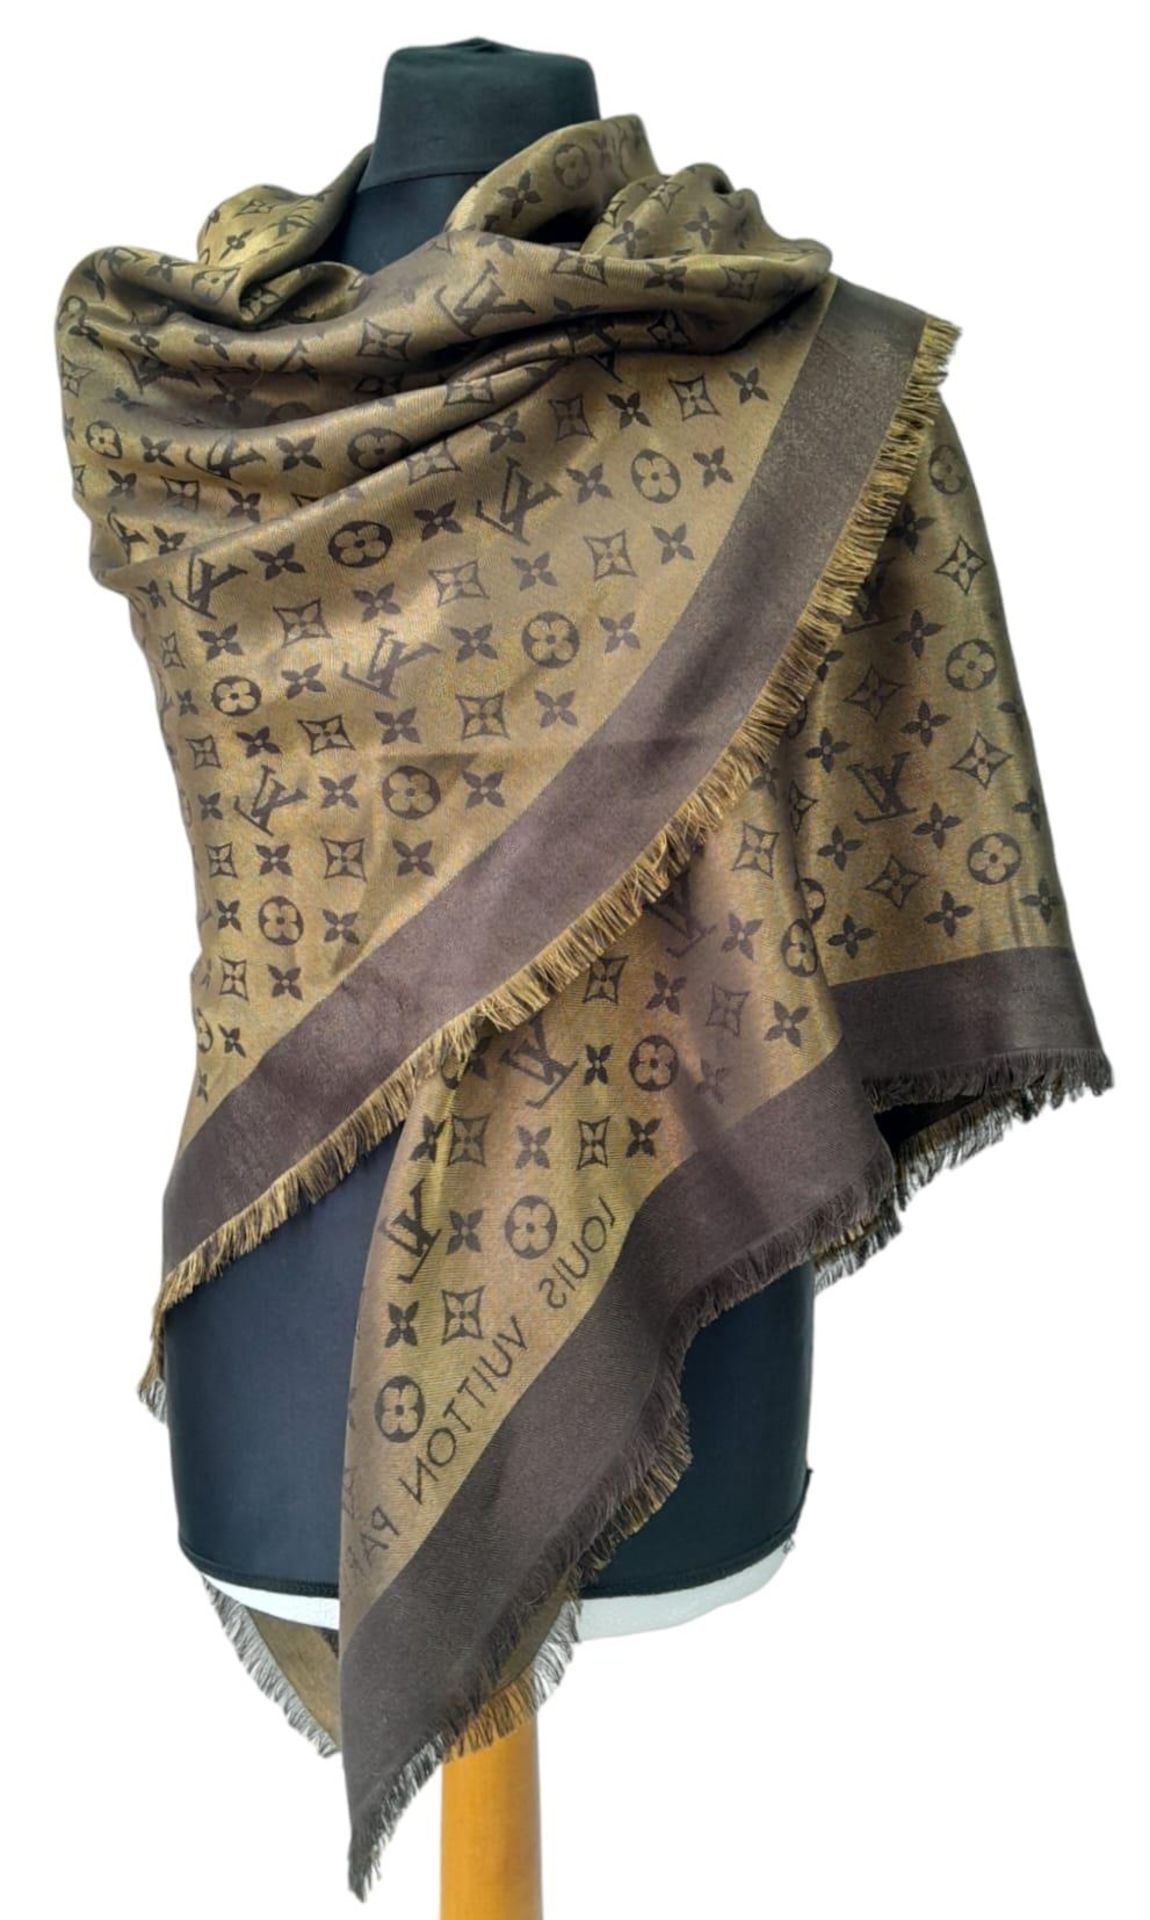 A Louis Vuitton Châle Monogram Shine Silk Scarf. Comes with purchase receipt. Approximately 140cm